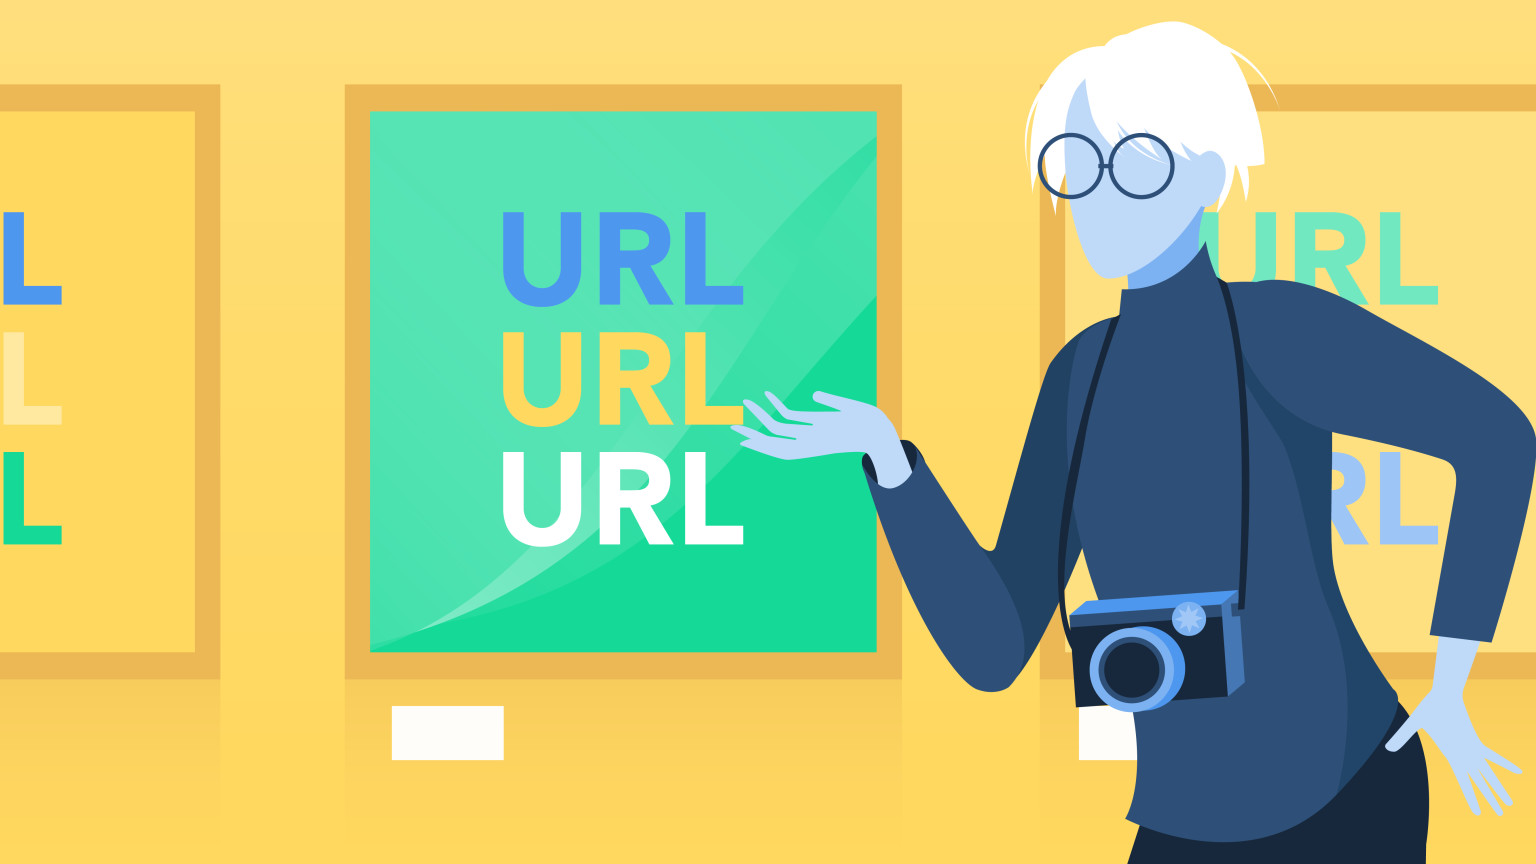 Andy Warhol point to a Gallery of URLs